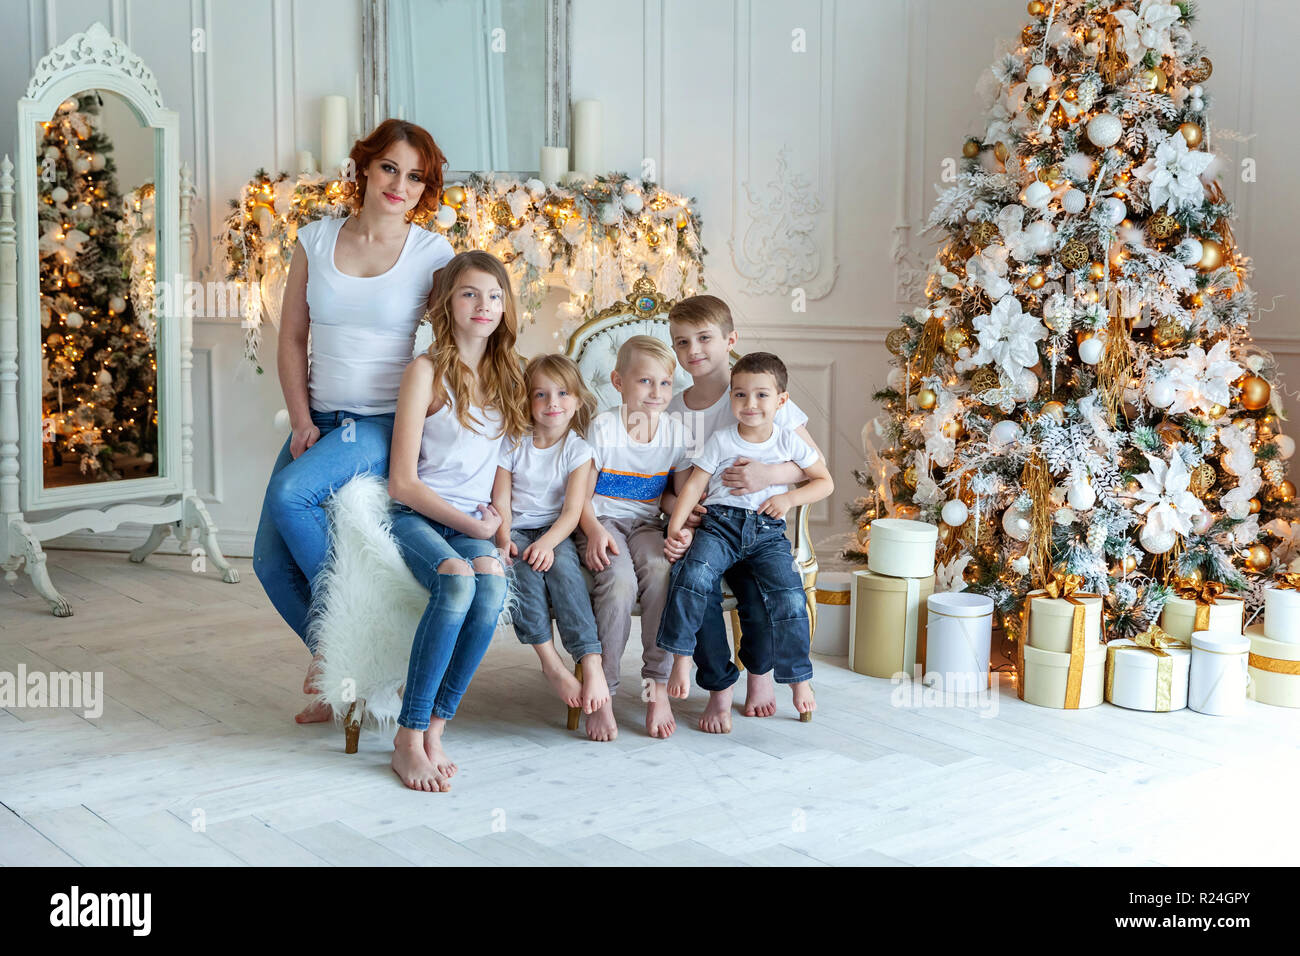 Ten Long Legs of a Family with Five Person Stock Photo - Image of july,  holidays: 117579340